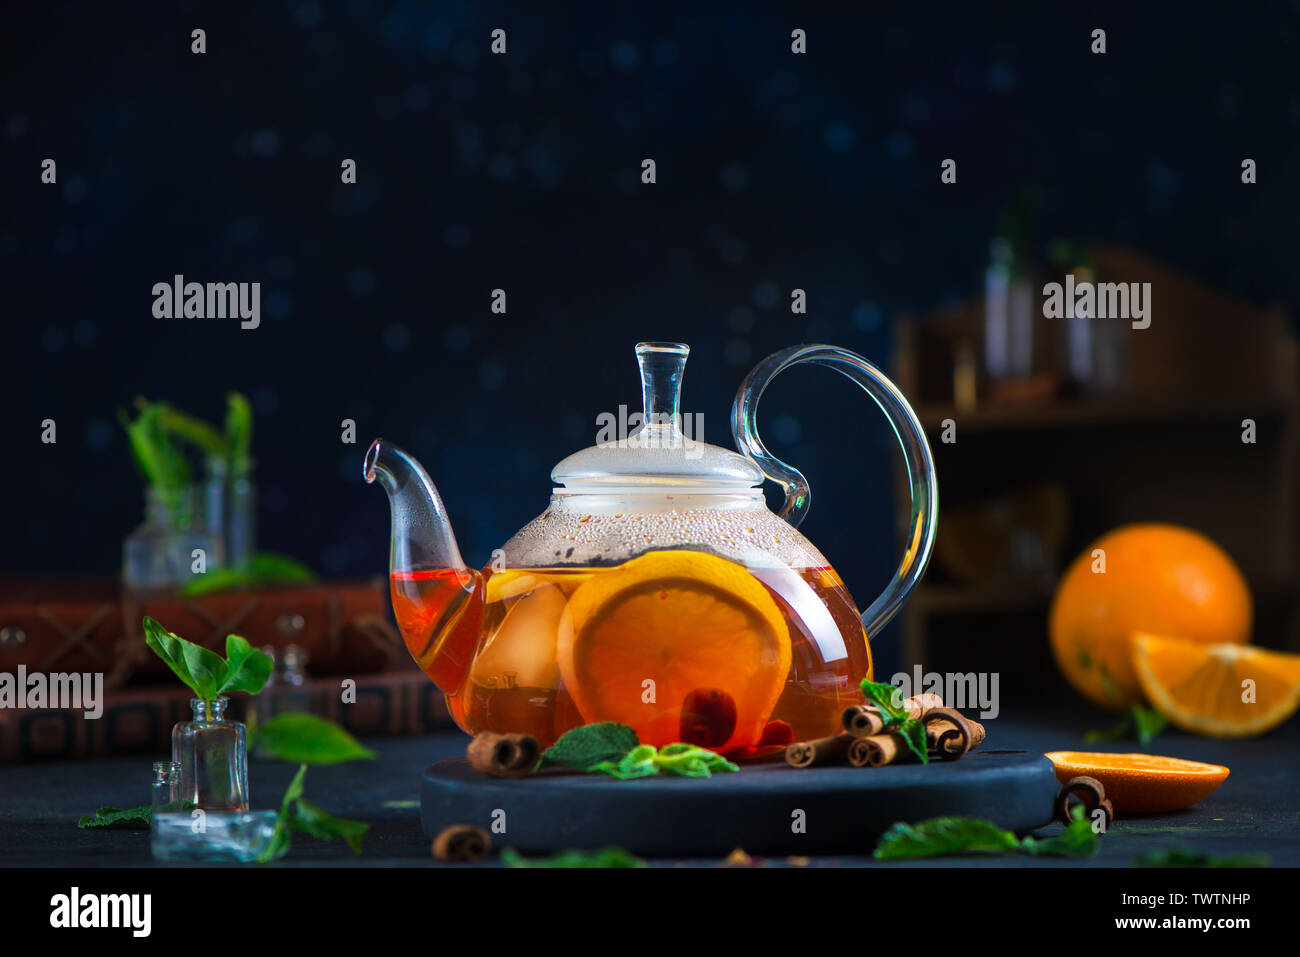 Citrus tea header with cinnamon and mint leaves in a glass teapot, dark food photography with copy space. Stock Photo